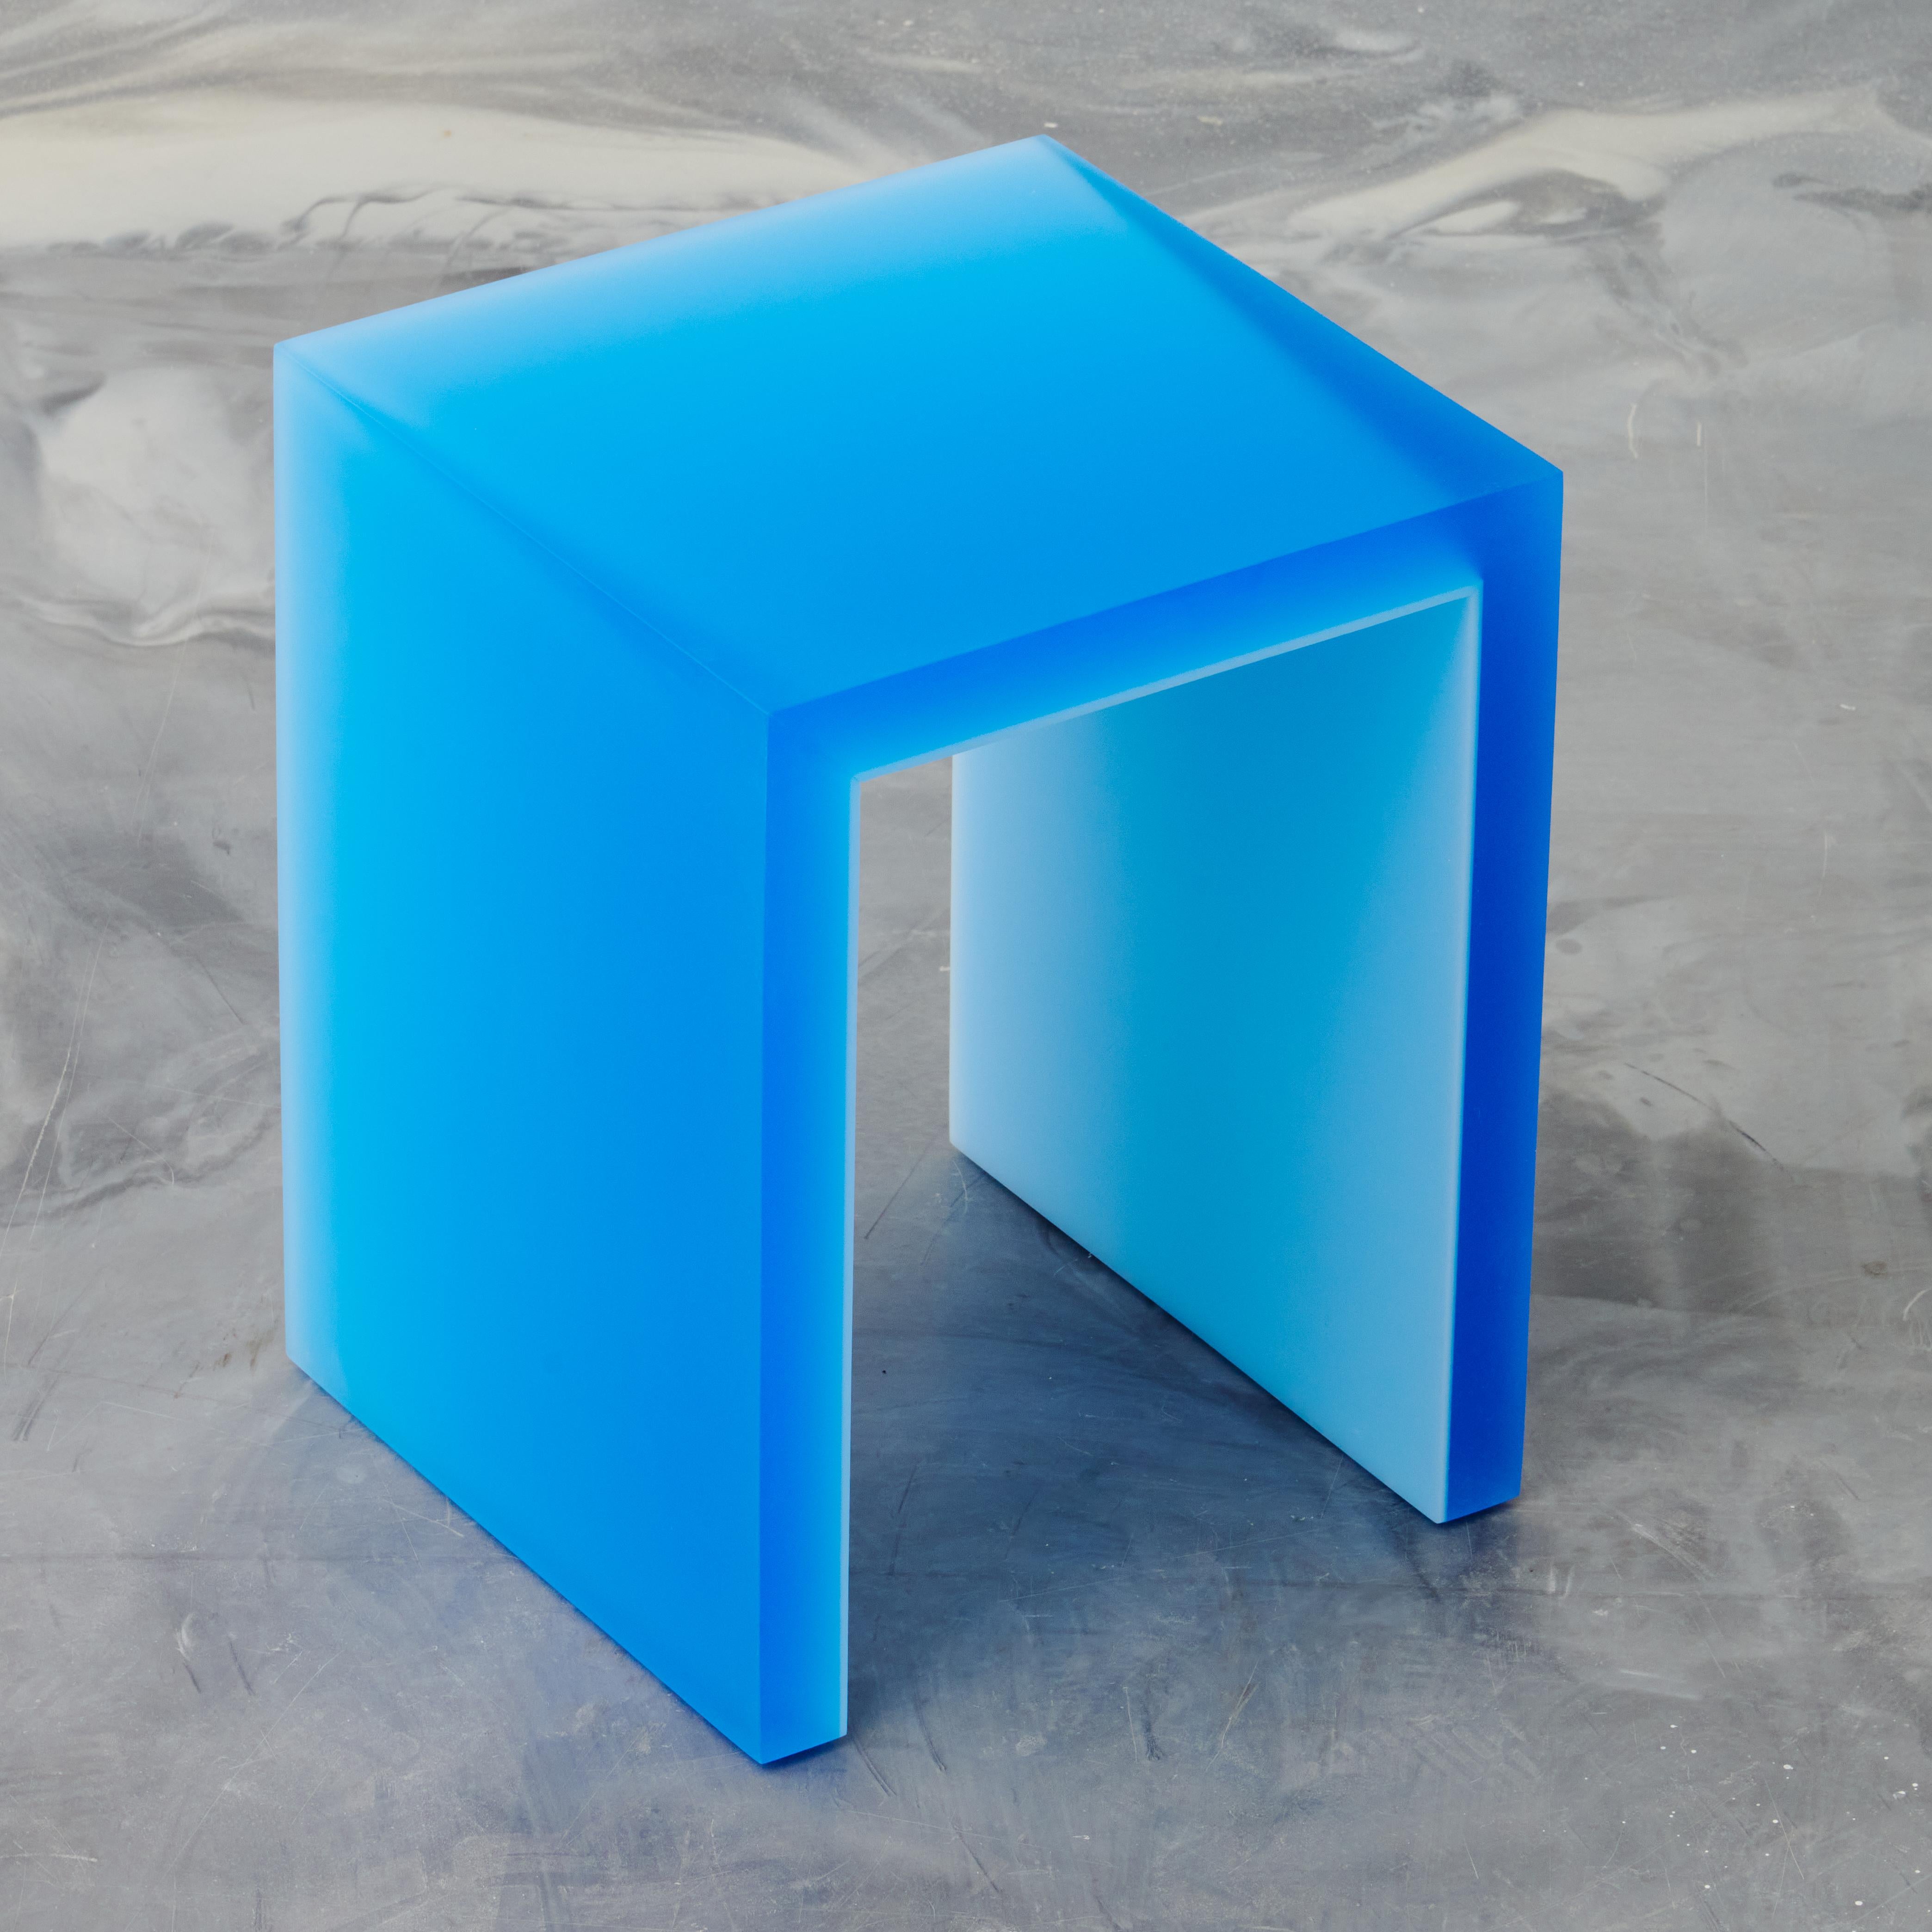 The pure shift side table uses opaque and transparent resin to effortlessly express Facture's signature shift technique with contrasting directions and angles to let light play on and through the piece.
Edition of 8 + 2AP.

Item available for